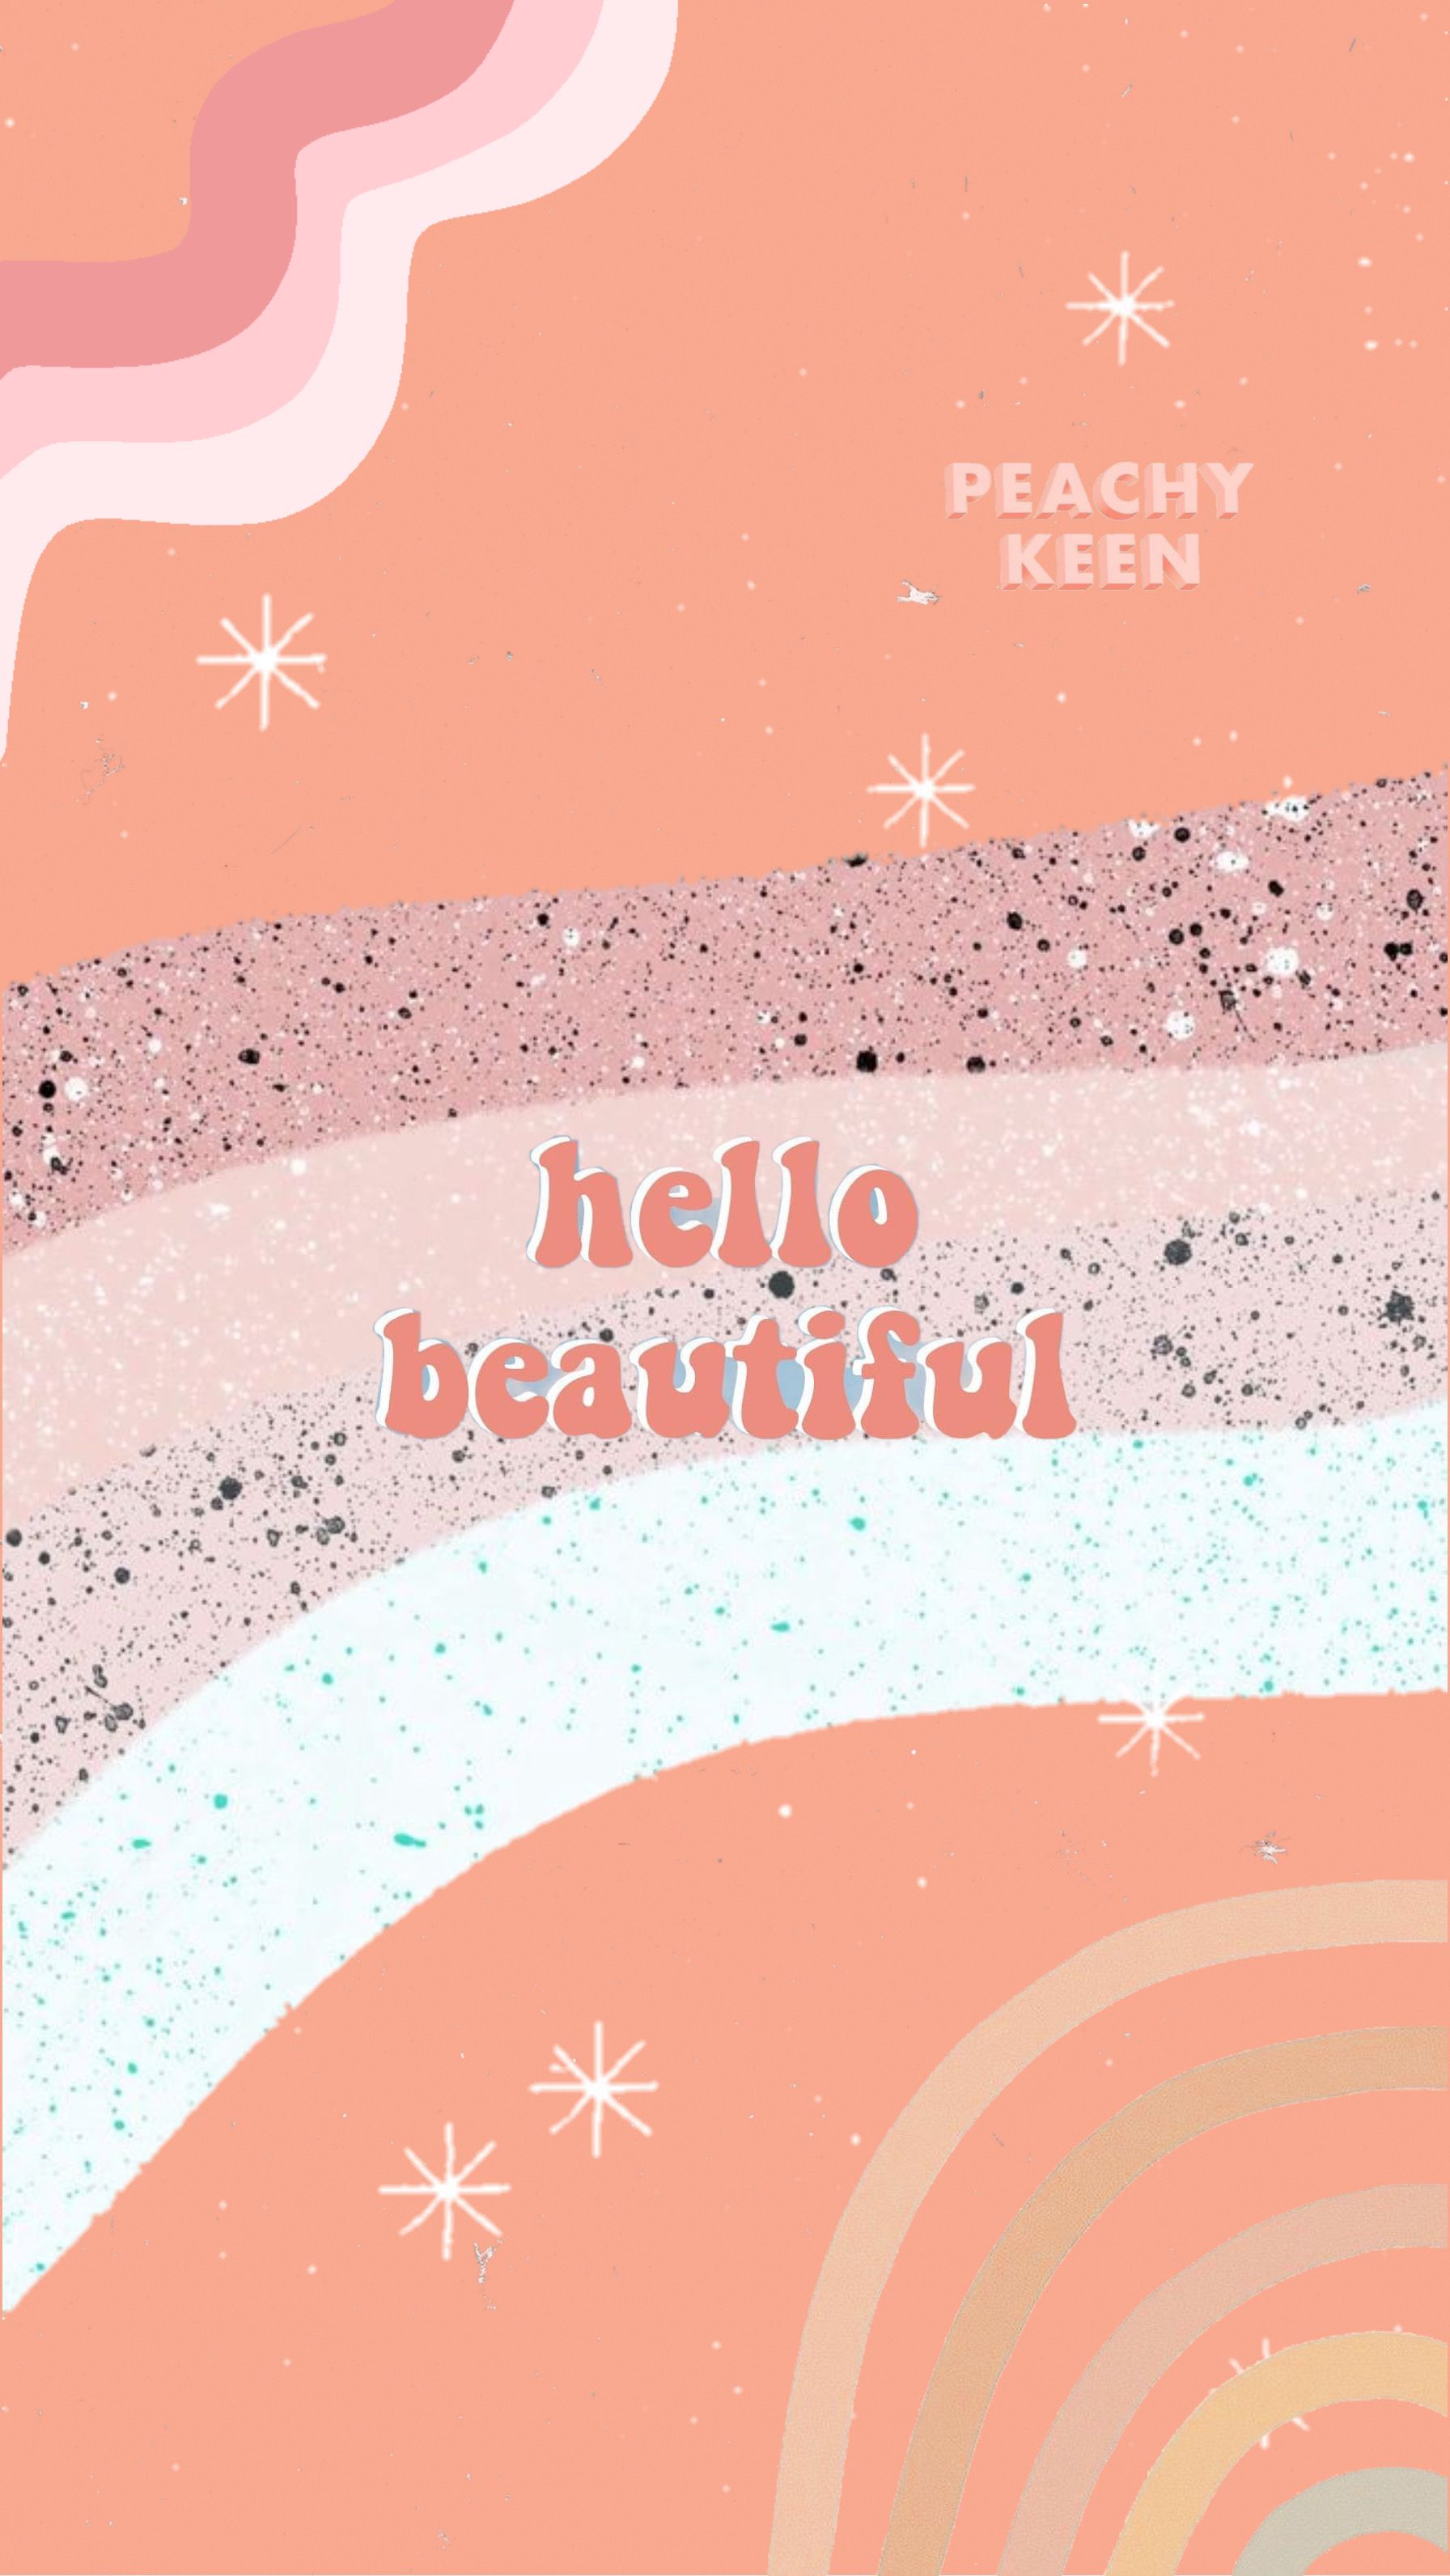 A poster with the words hello beautiful on it - Beautiful, peach